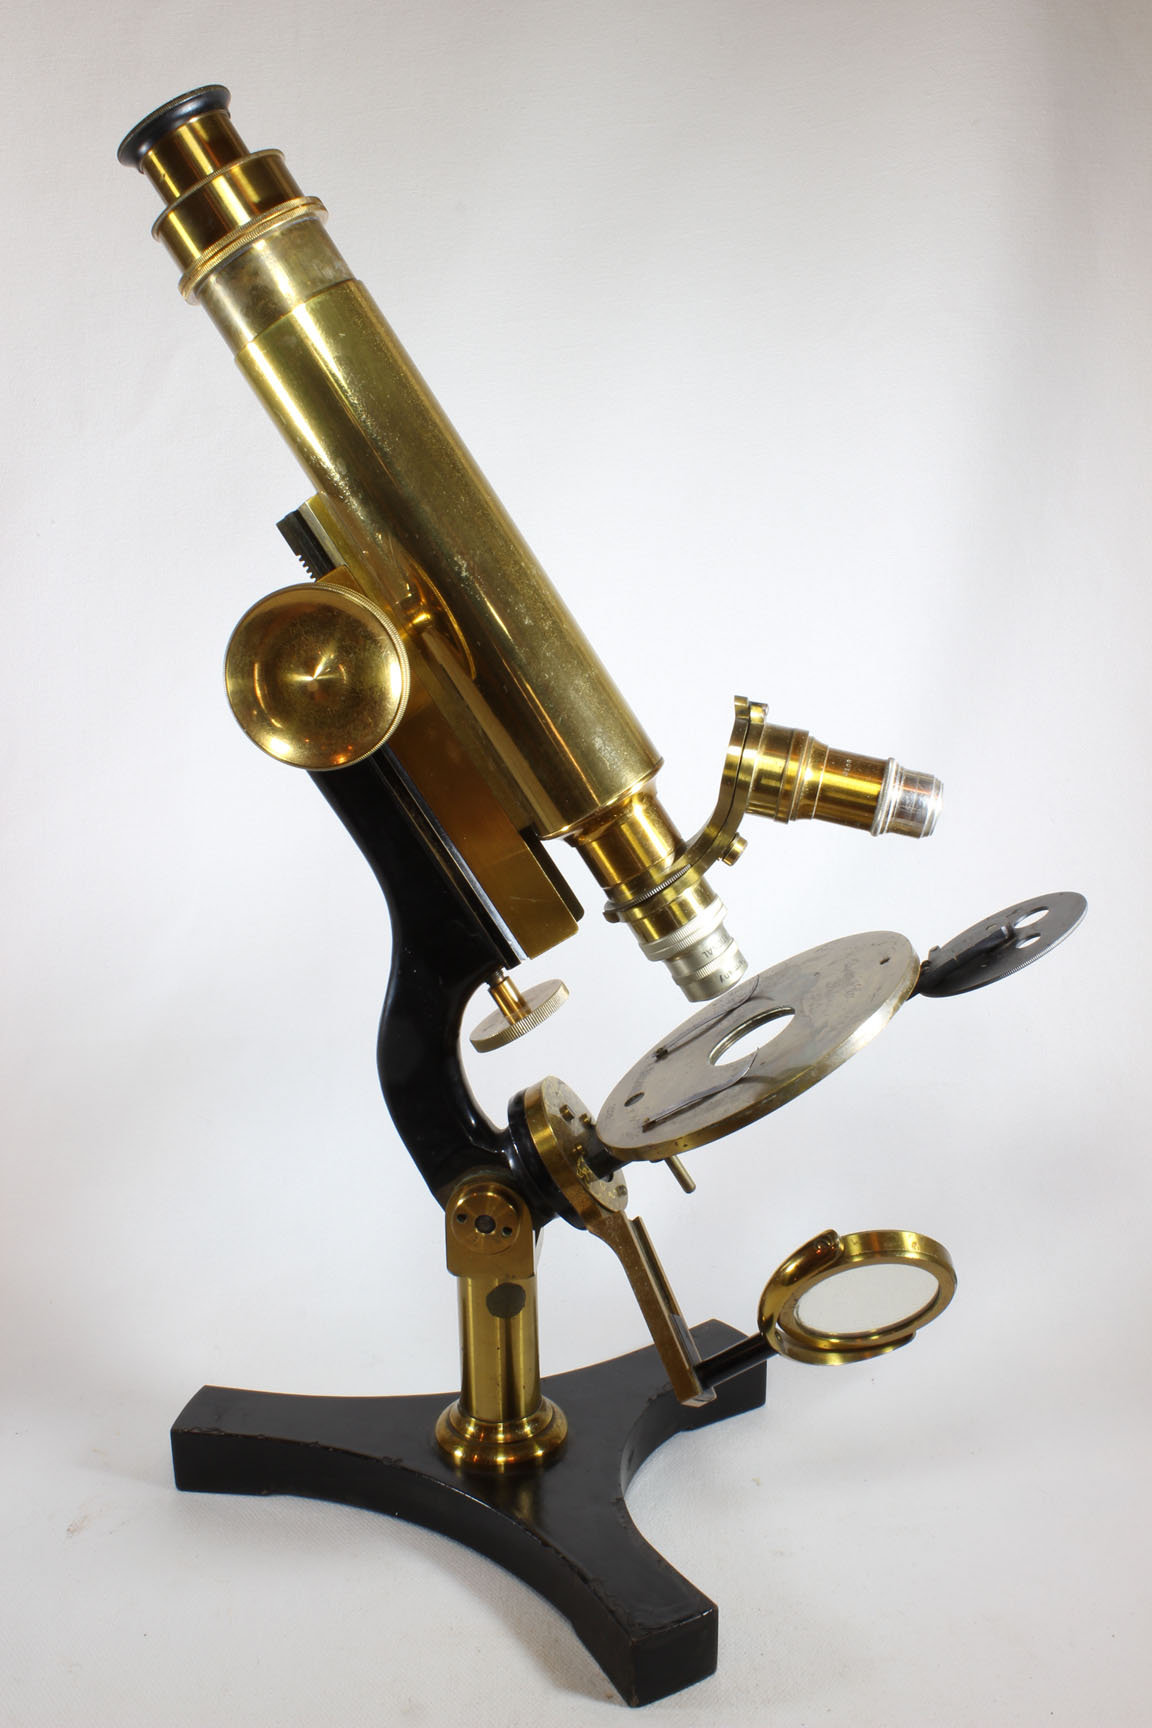 Acme Microscope right side